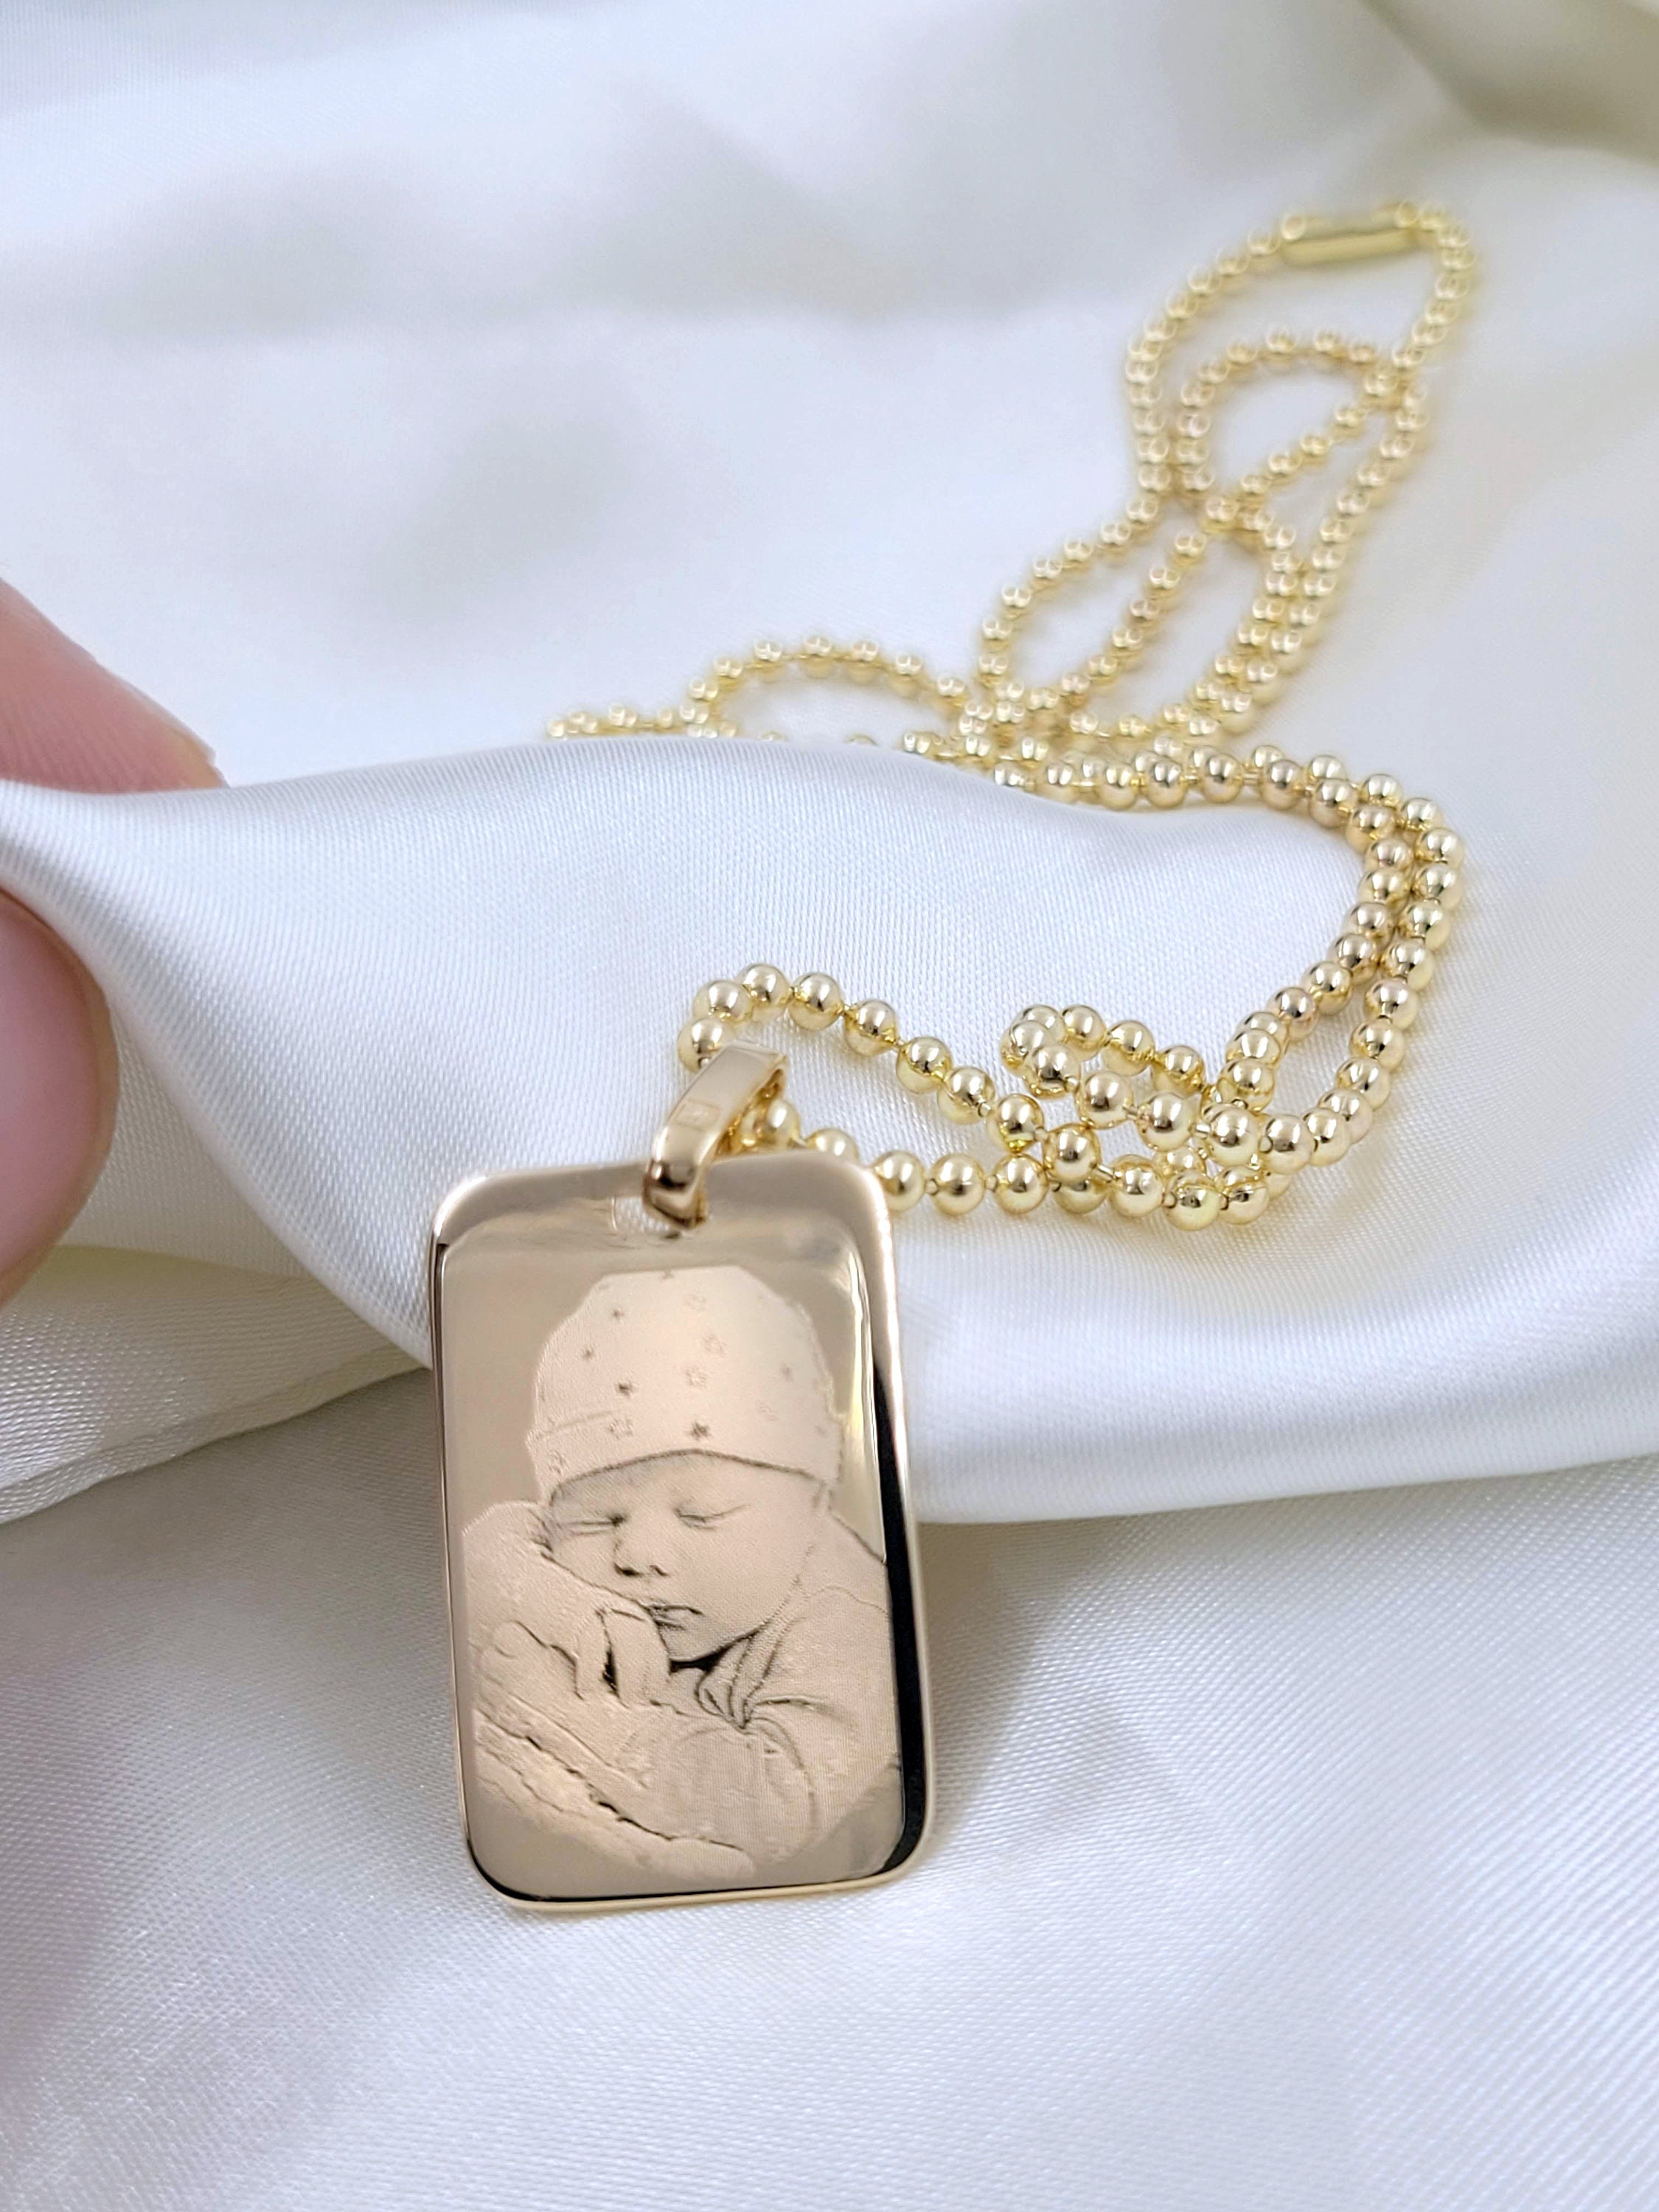 Personalized Gold Dog Tag Pendant - Classic Large Tag Pendant Sterling Silver / Old English